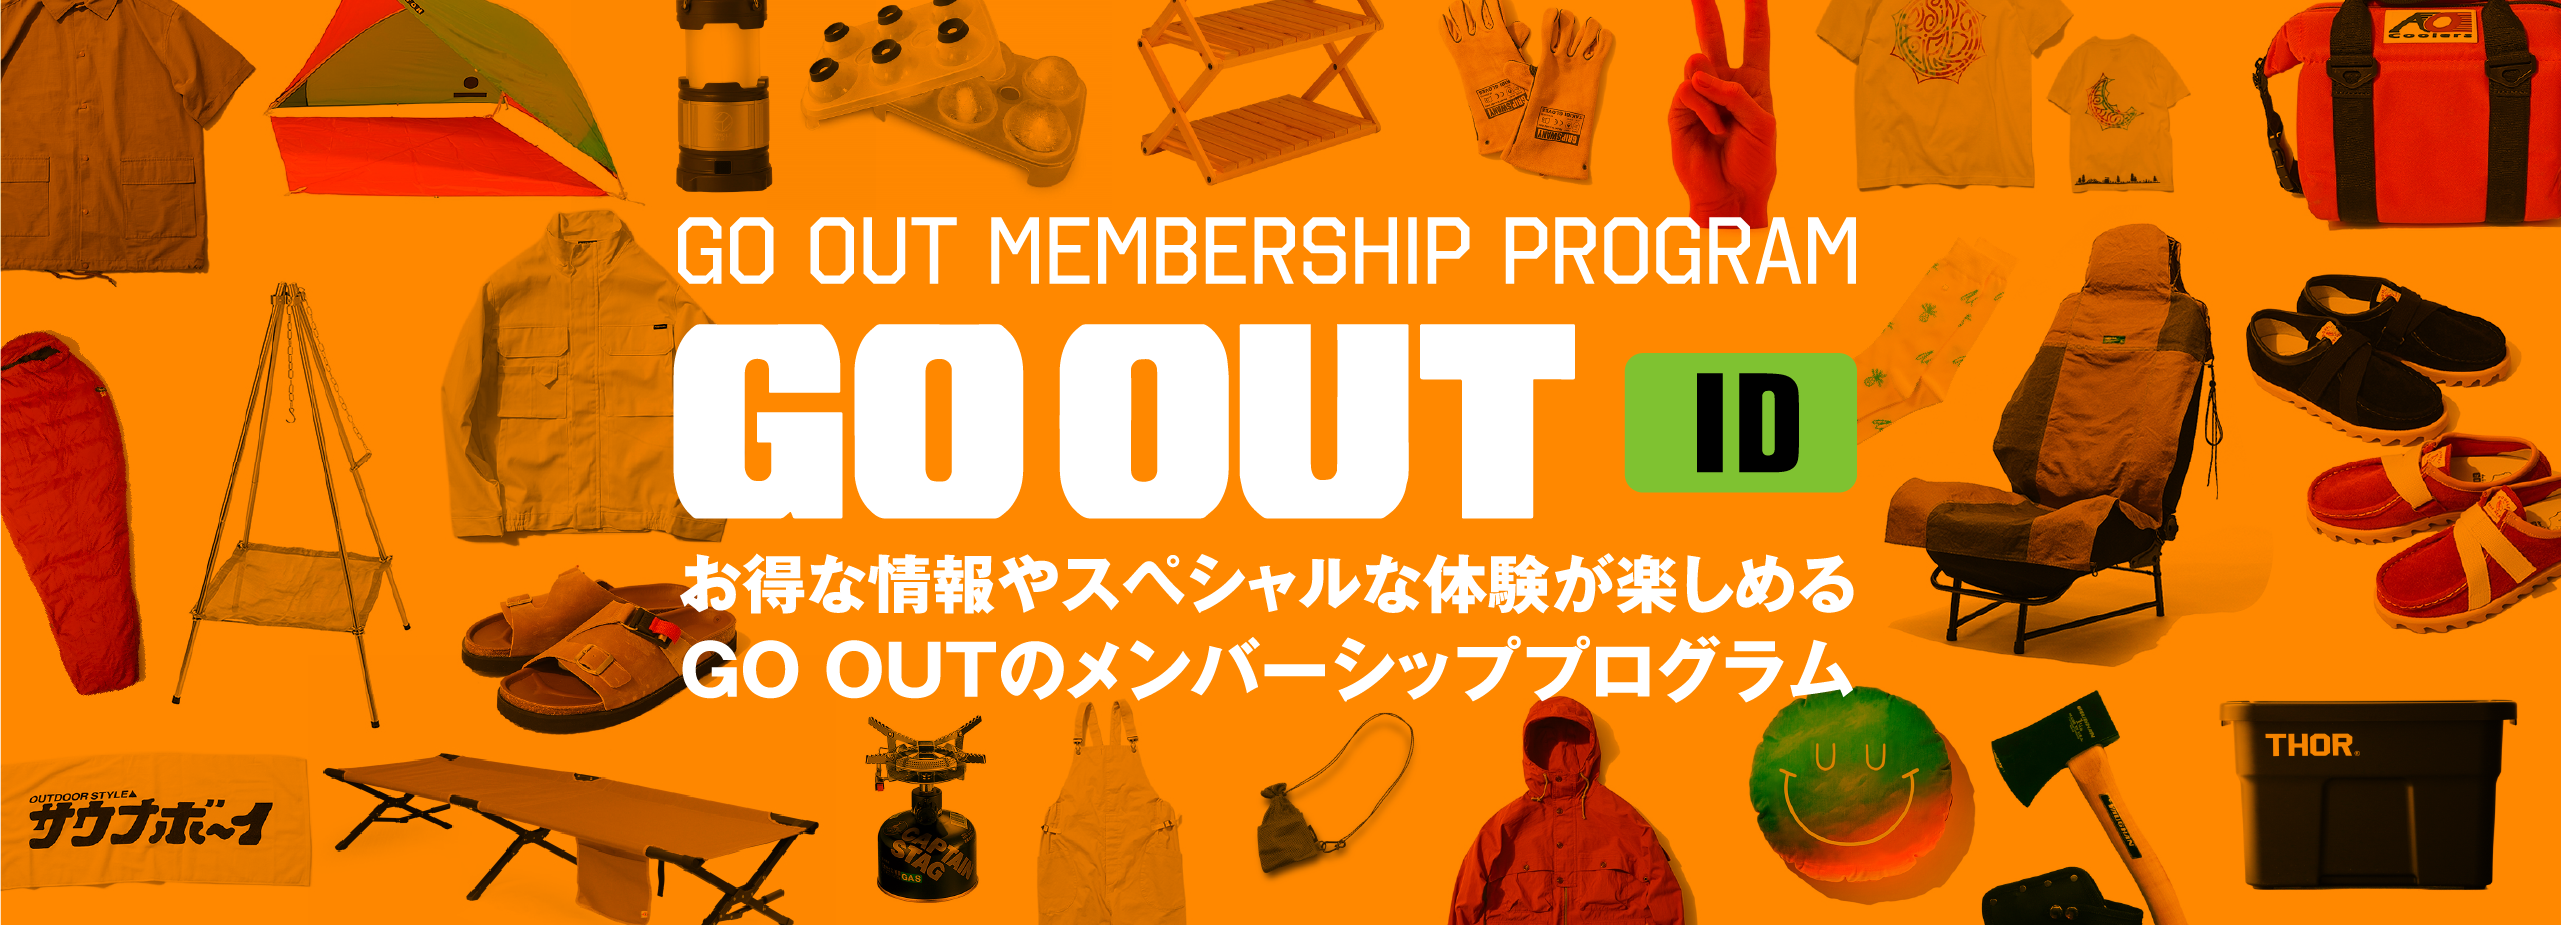 MEMBERSHIP RENEWWAL GO OUTの公式通販サイト「GO OUT Online」の会員システムがリニューアル！